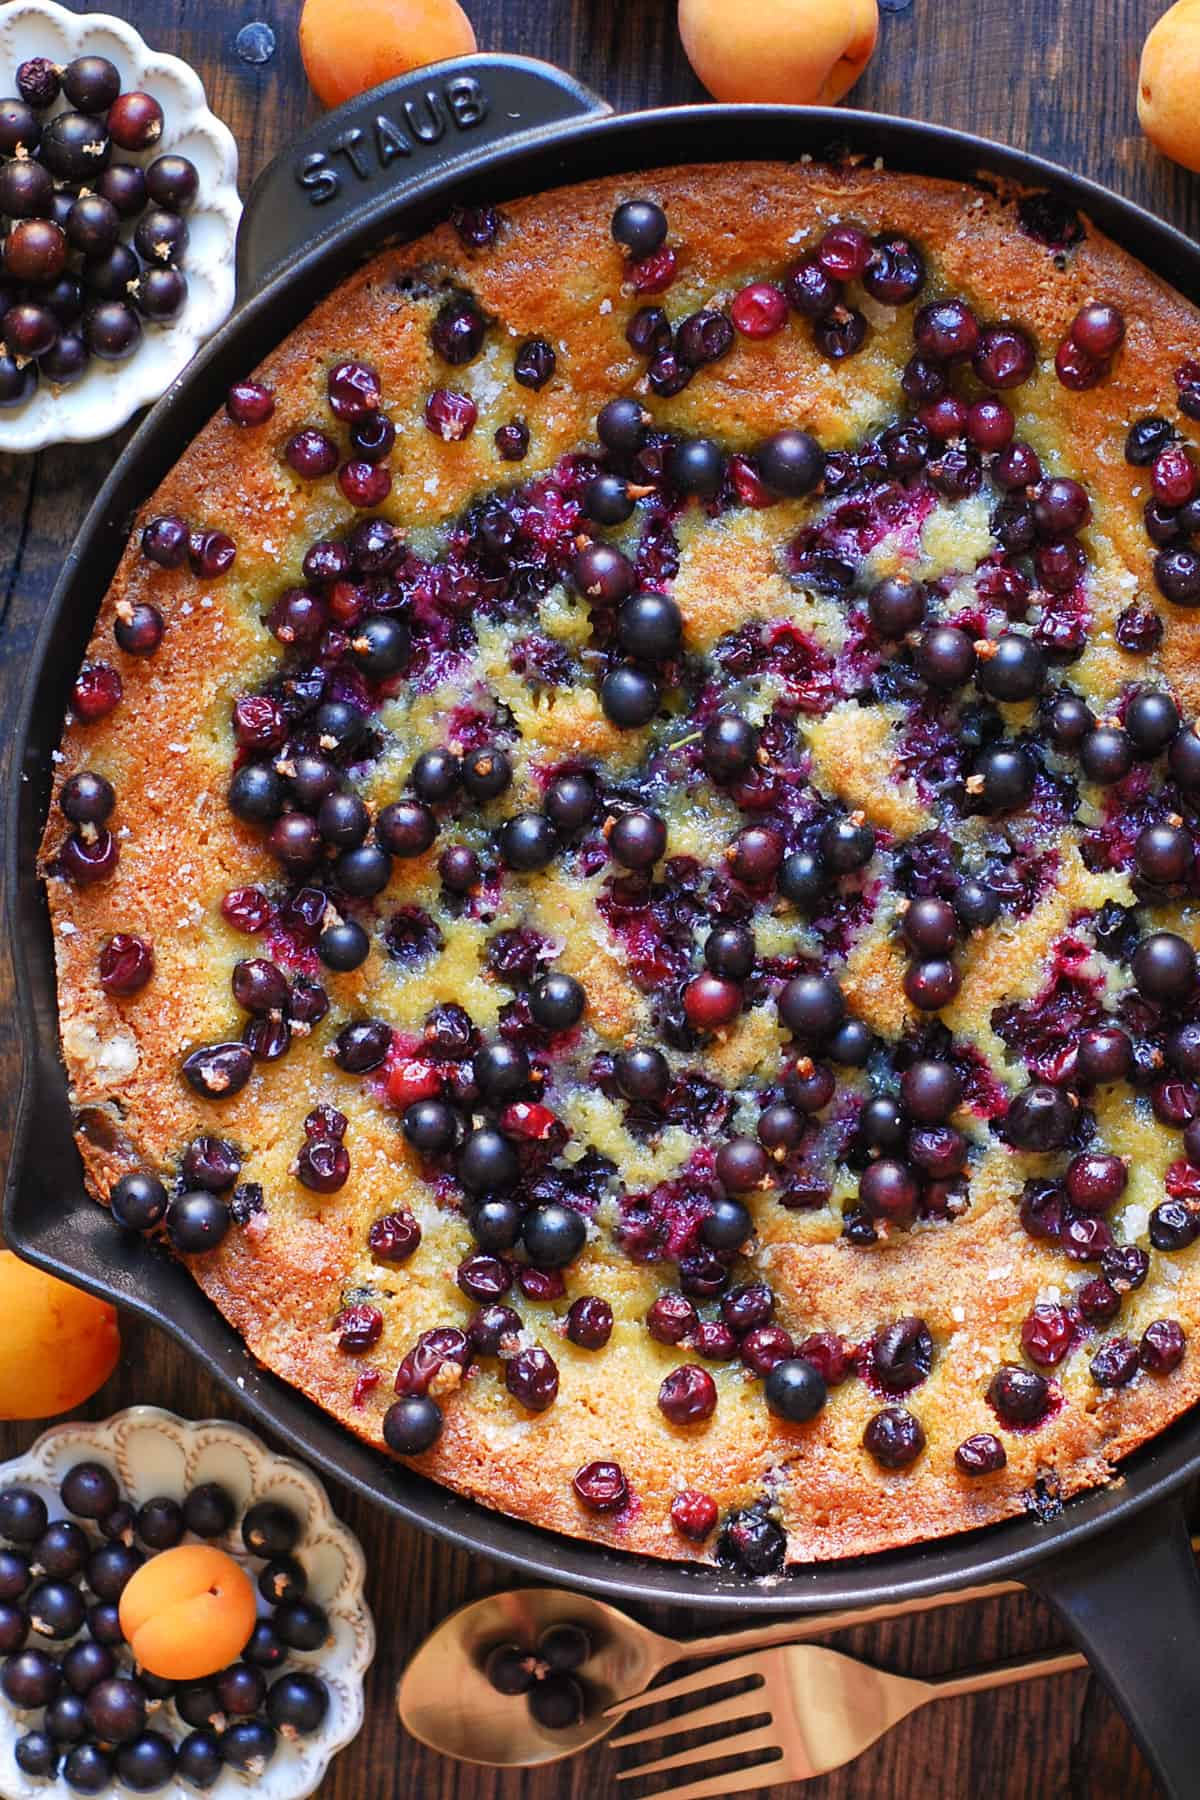 Black Currant Cake topped with fresh black currants - in a cast iron skillet.